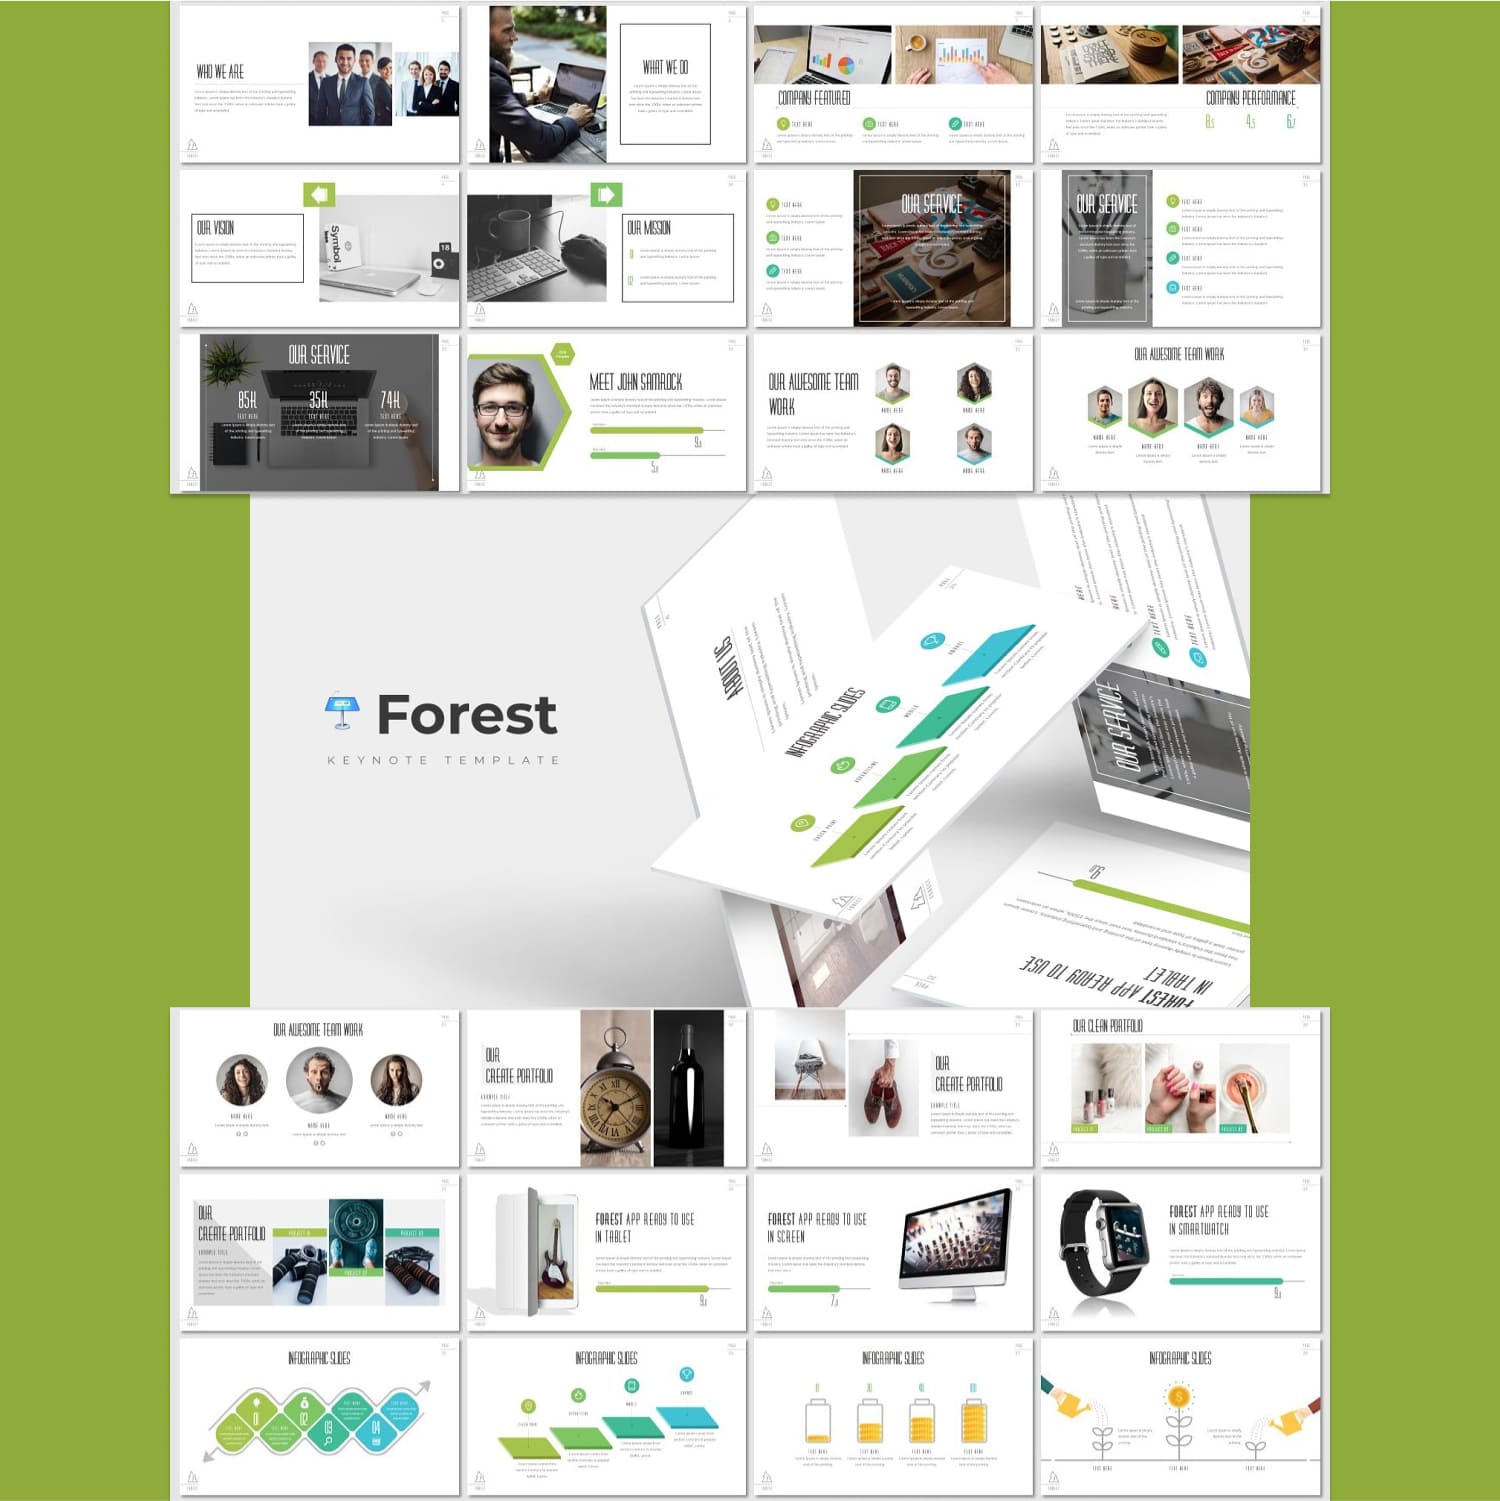 Forest - Keynote Template cover.